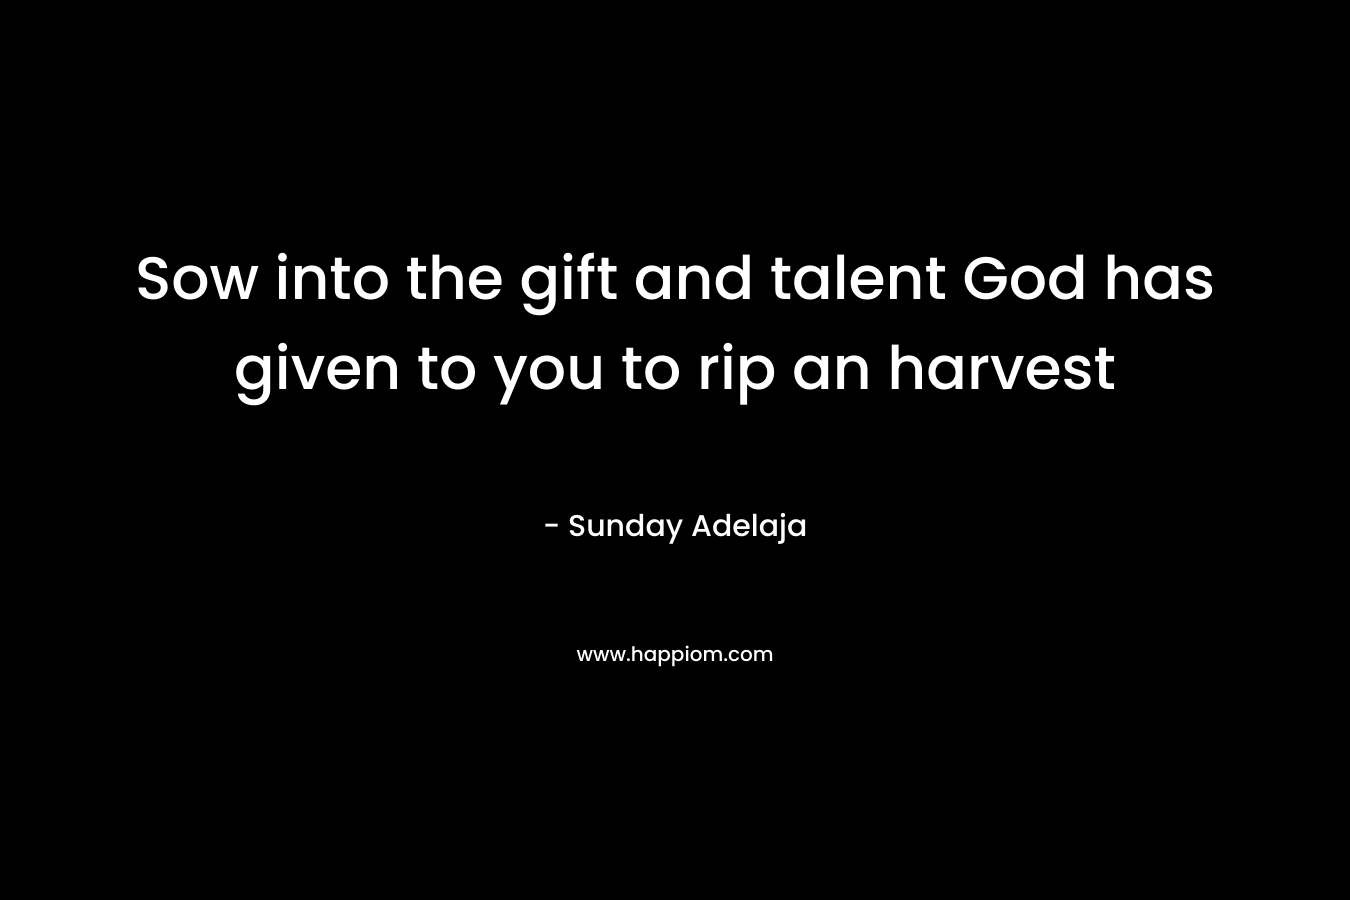 Sow into the gift and talent God has given to you to rip an harvest